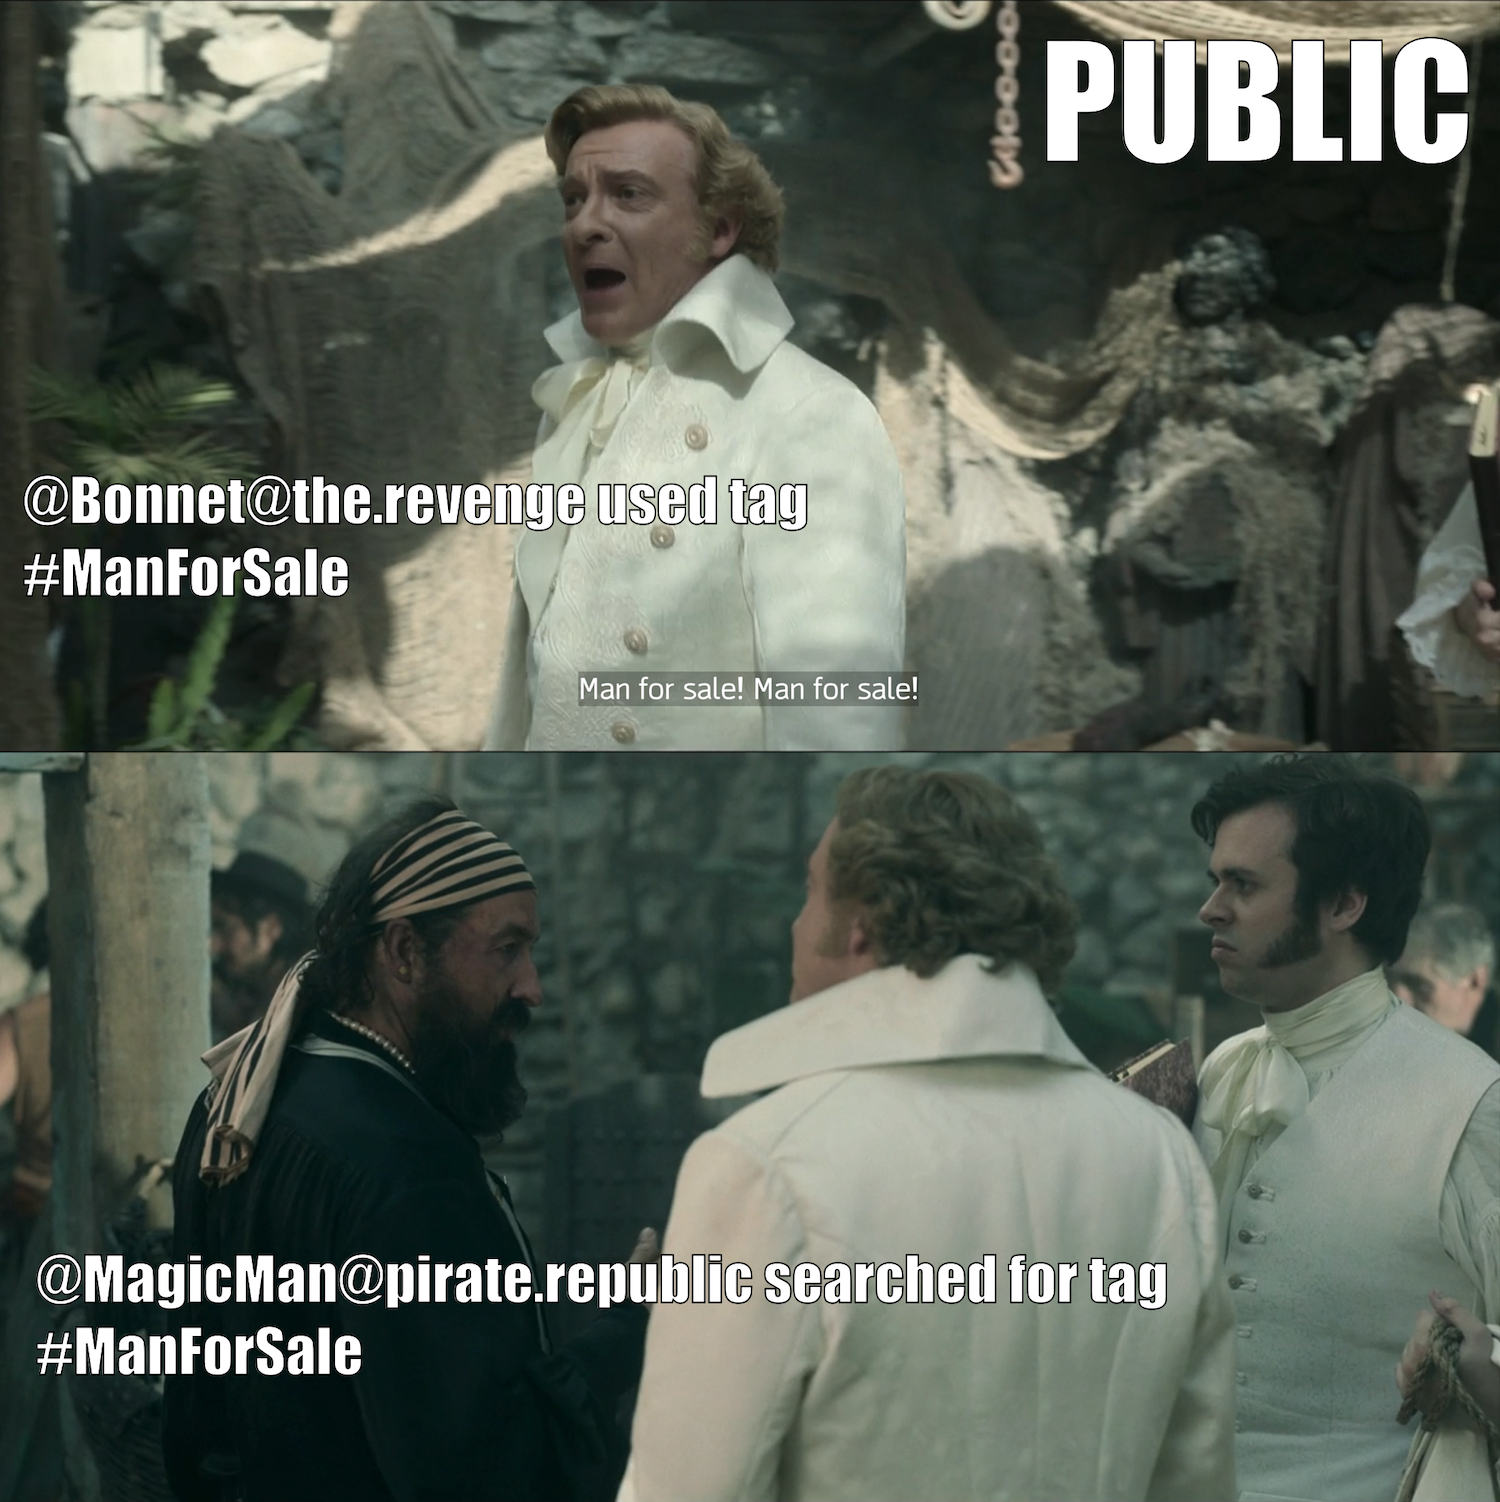 Two screenshots from episode 3, where Stede is doing his “Man for sale!” marketing stunt at the Republic of Pirates. In the first screenshot, Stede shouts “Man for sale! Man for sale!” This is a Public post from @Bonnet@the.revenge tagging his post with #ManForSale. In the second screenshot we see the Magic Man approach Stede and Lucius. @MagicMan@pirate.republic searched posts that use the tag #ManForSale.